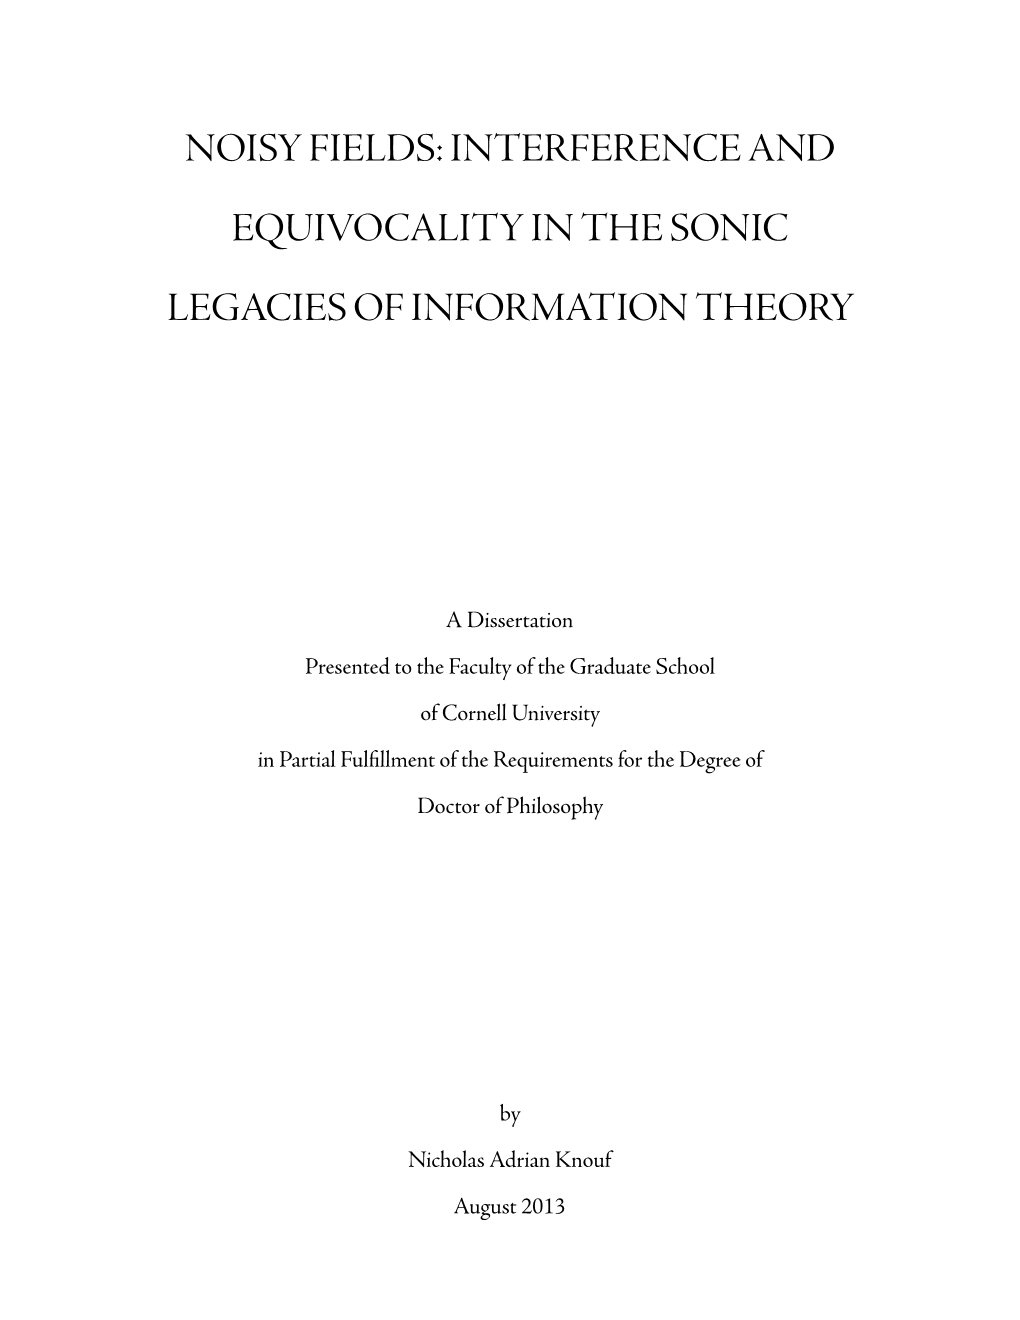 Noisy Fields: Interference and Equivocality in the Sonic Legacies of Information Theory